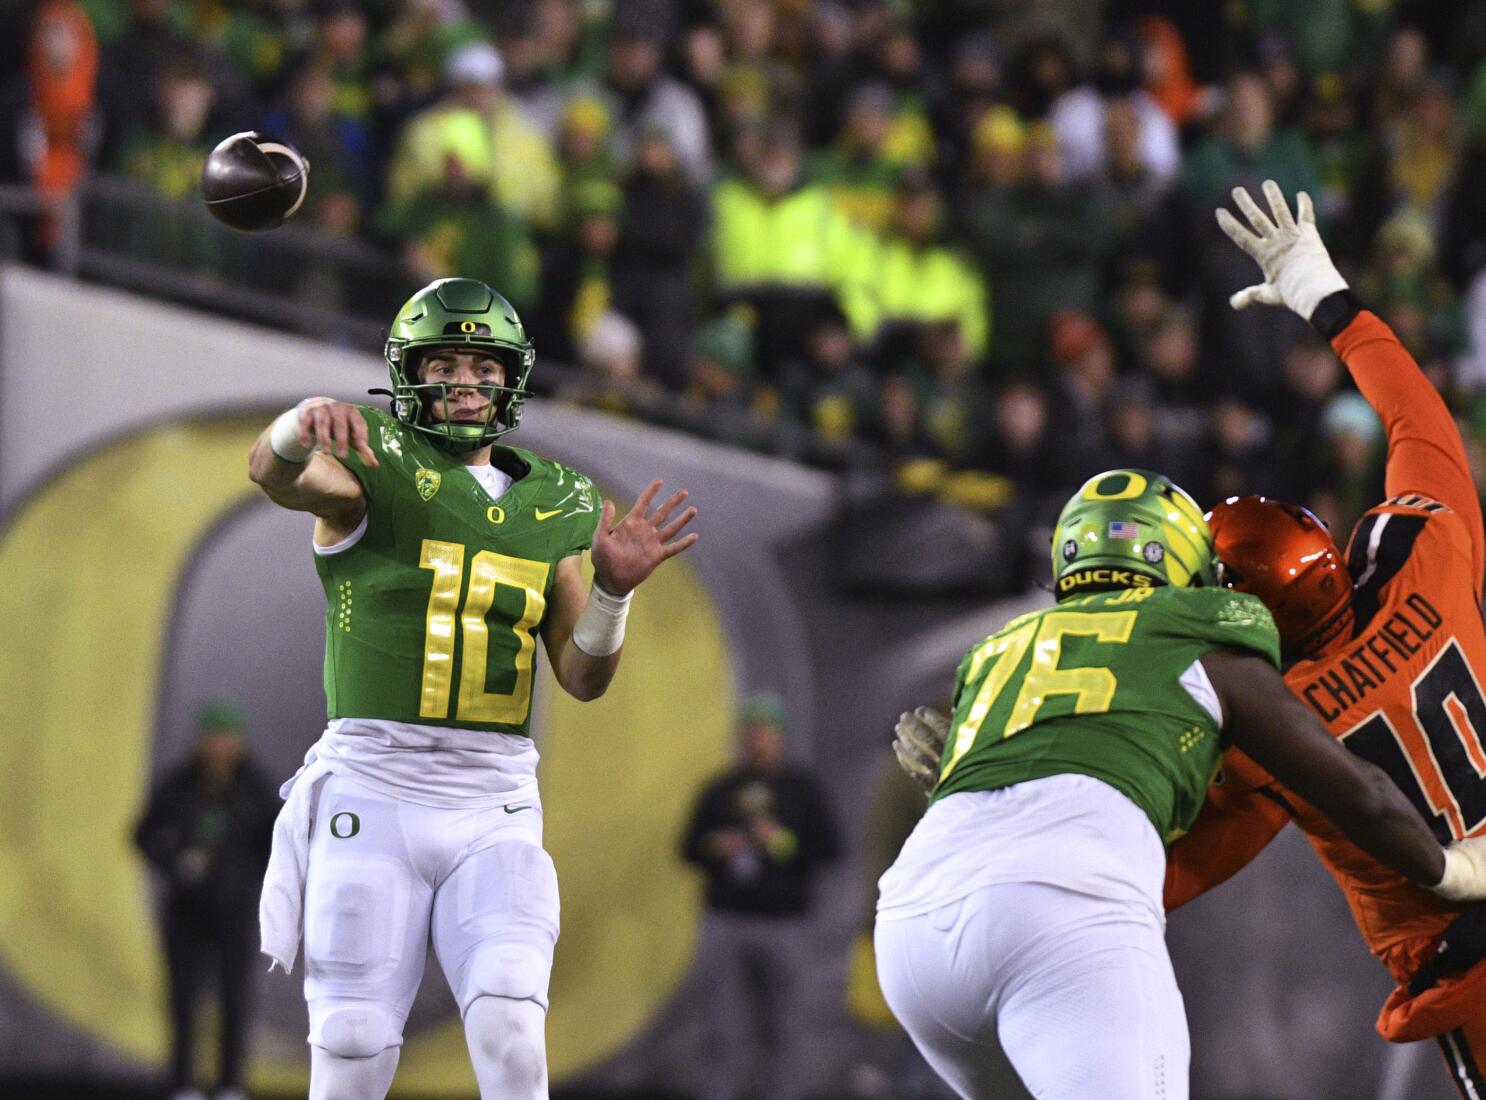 Oregon Upsets Ohio State, Keeping Pac-12 in Playoff Mix - The New